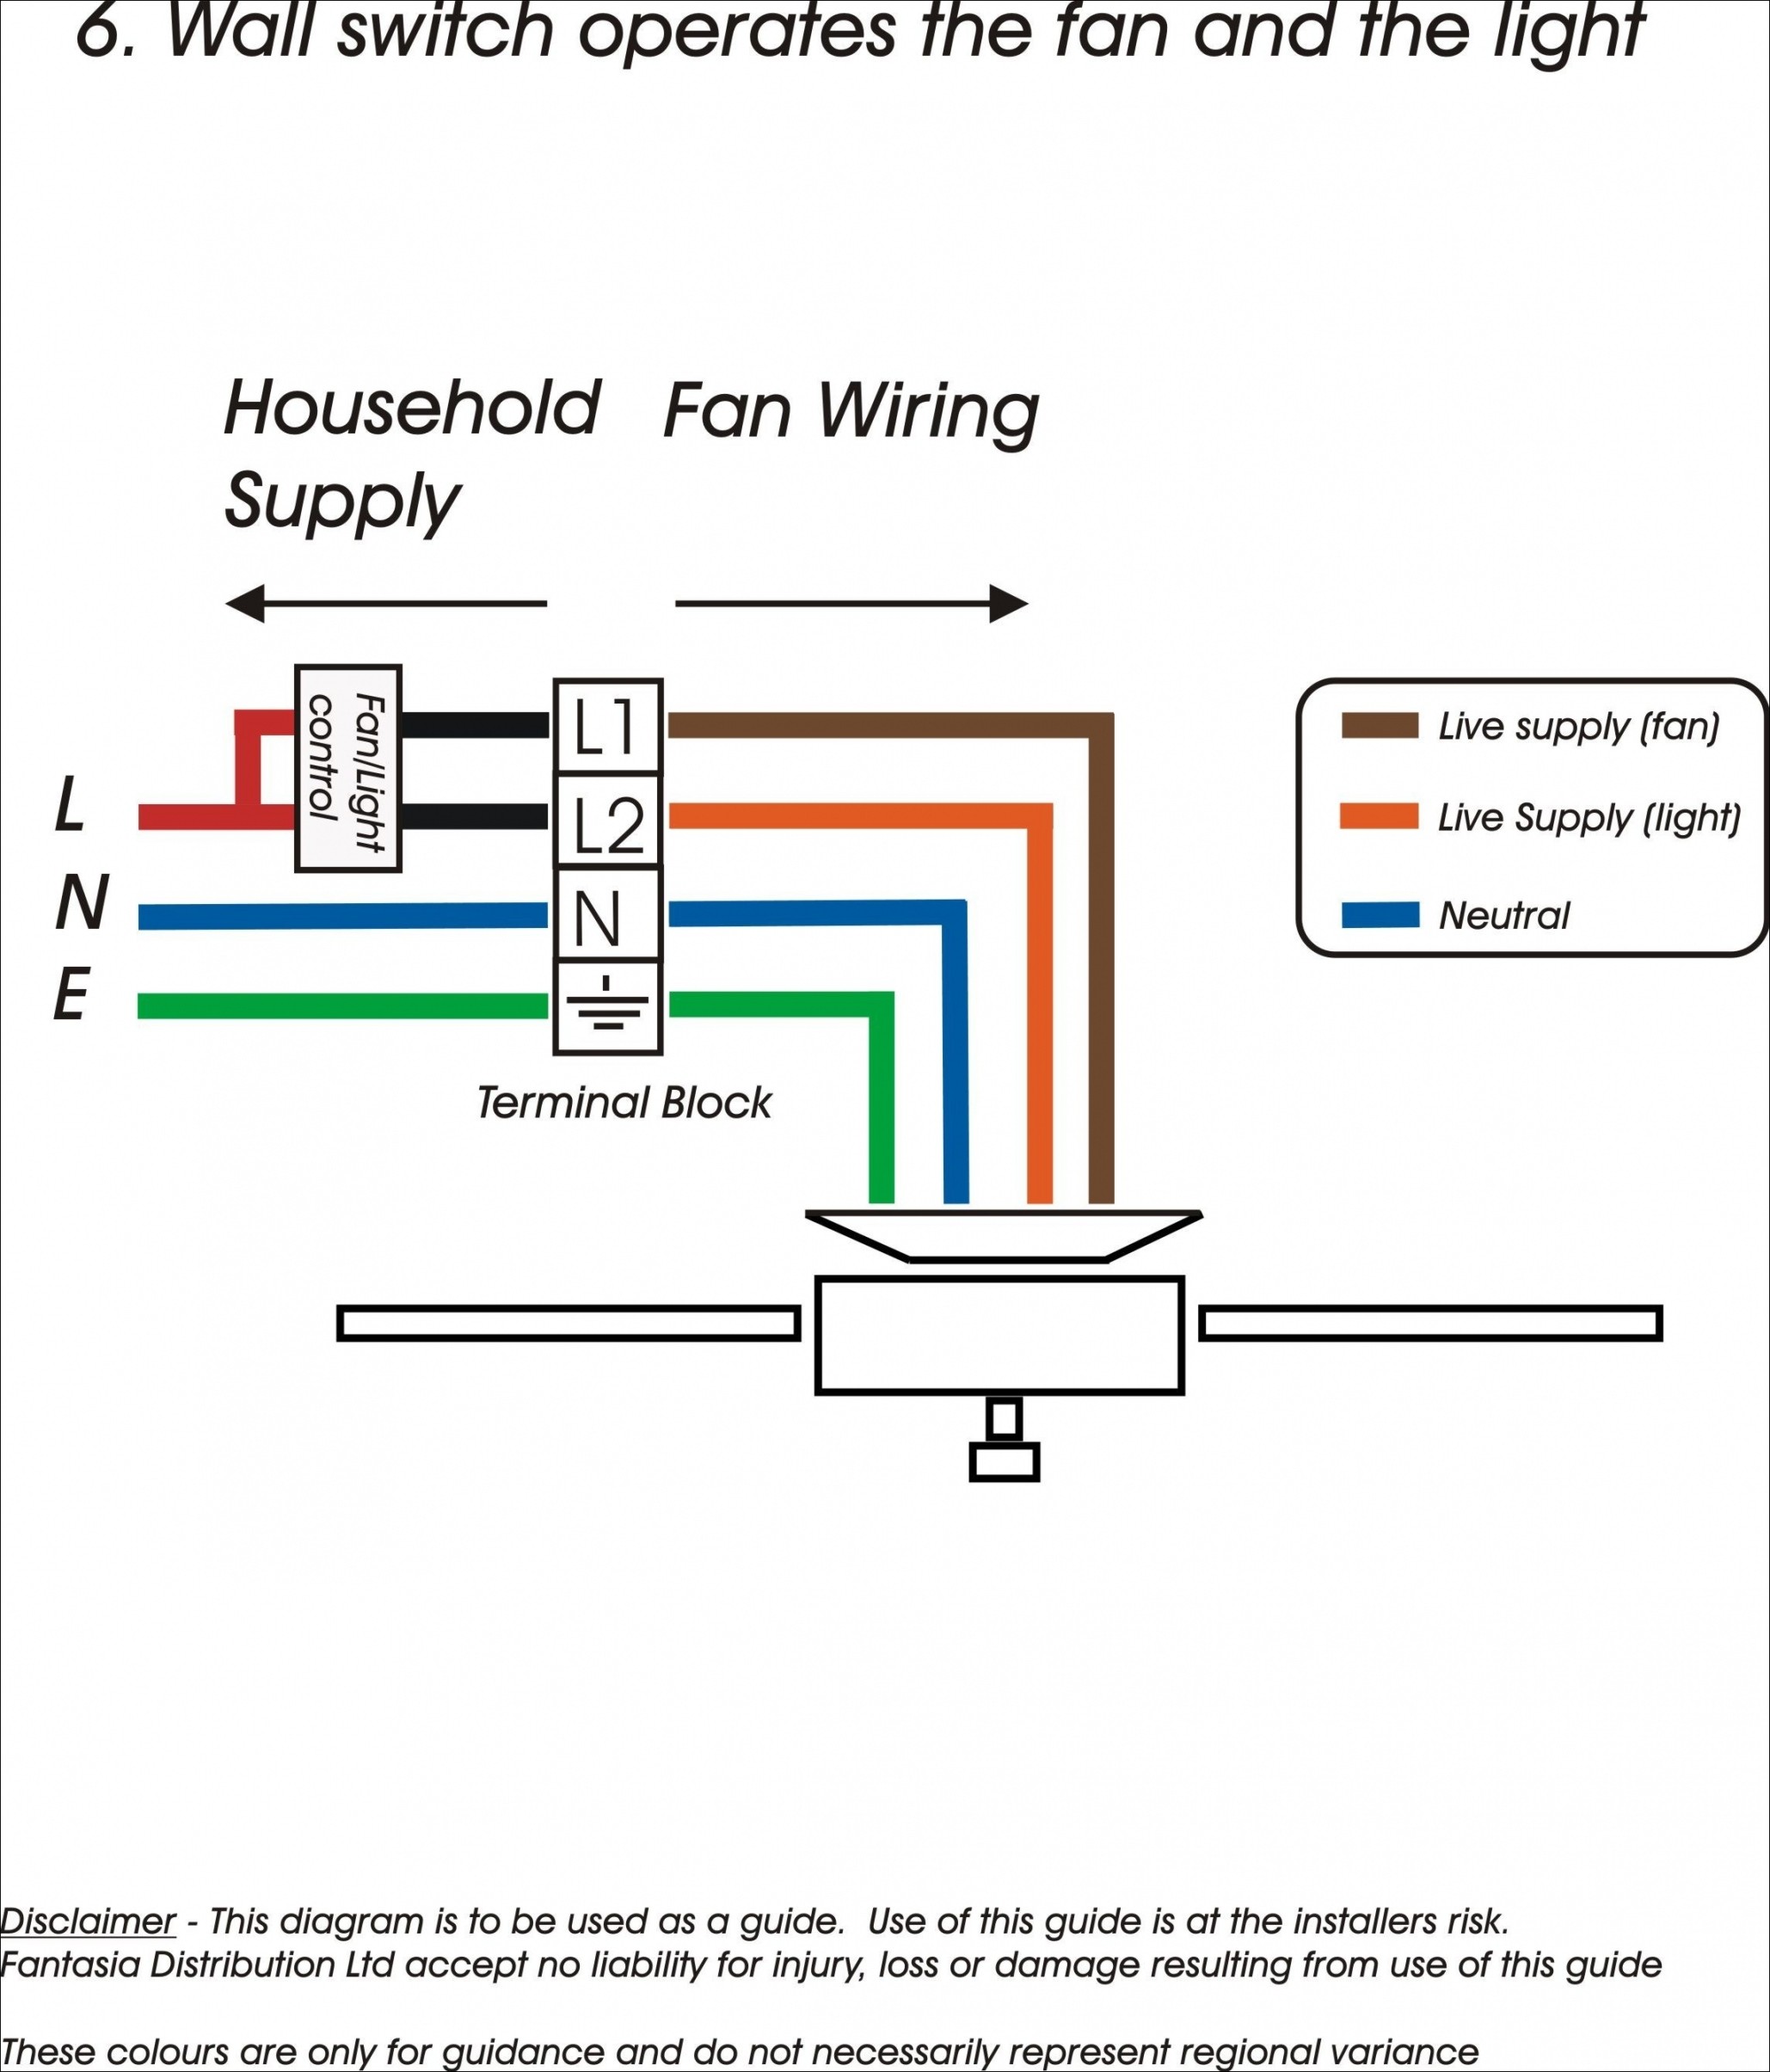 Ceiling Fans Wiring Diagram Do It Yourself Wiring Diagrams Awesome Boss Od 2 Turbo Overdrive Of Ceiling Fans Wiring Diagram